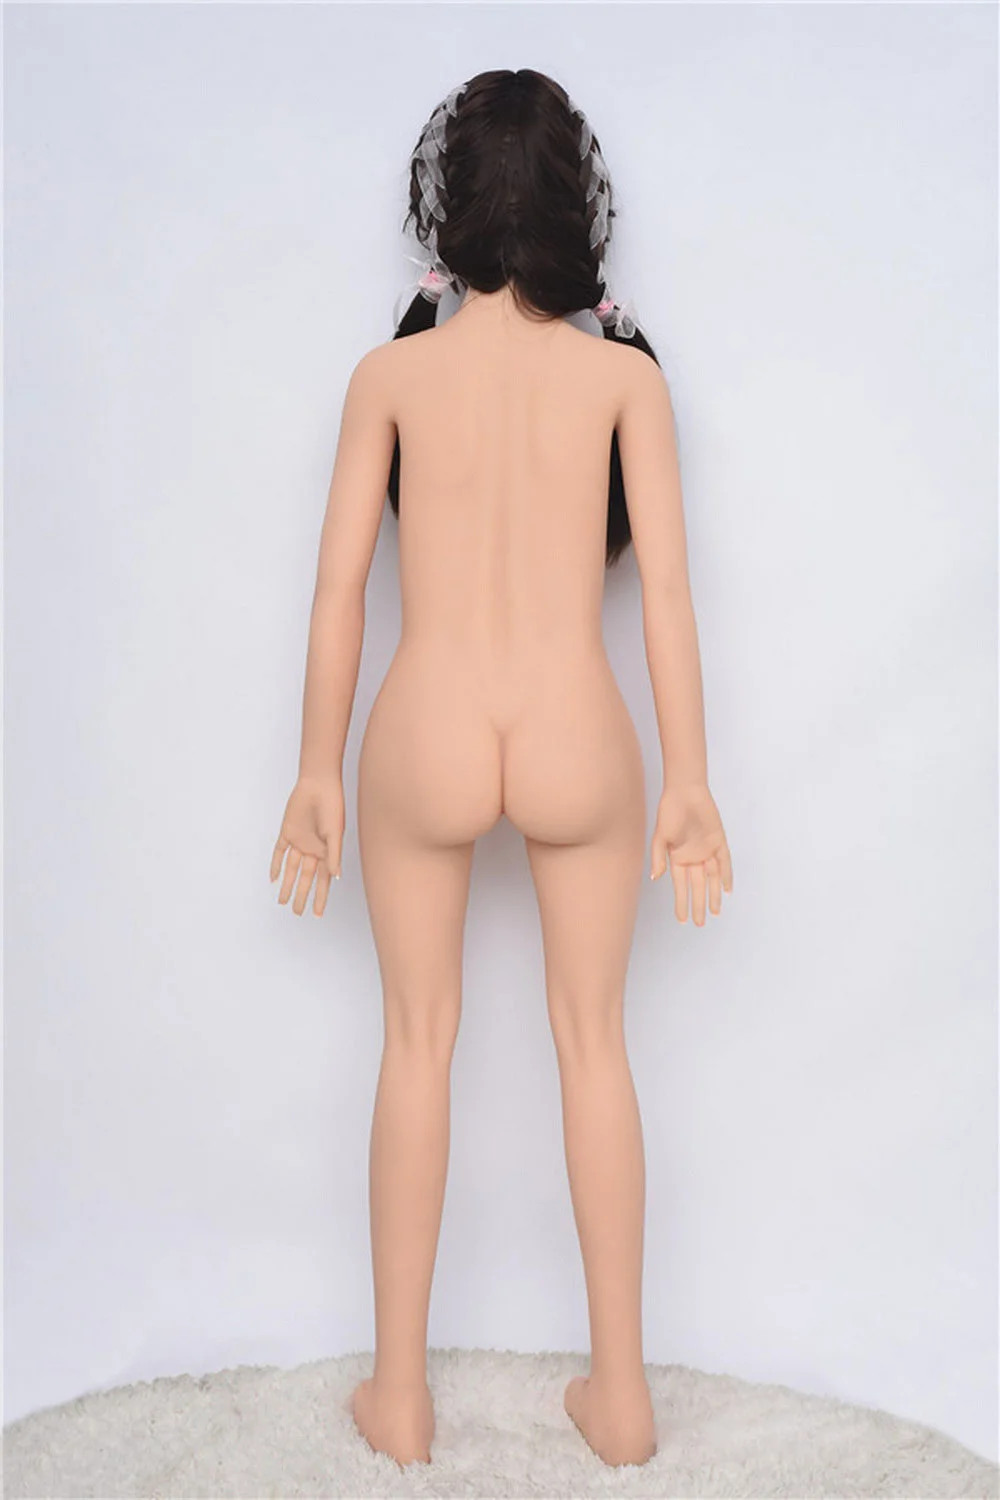 A sex doll standing naked and facing the wall